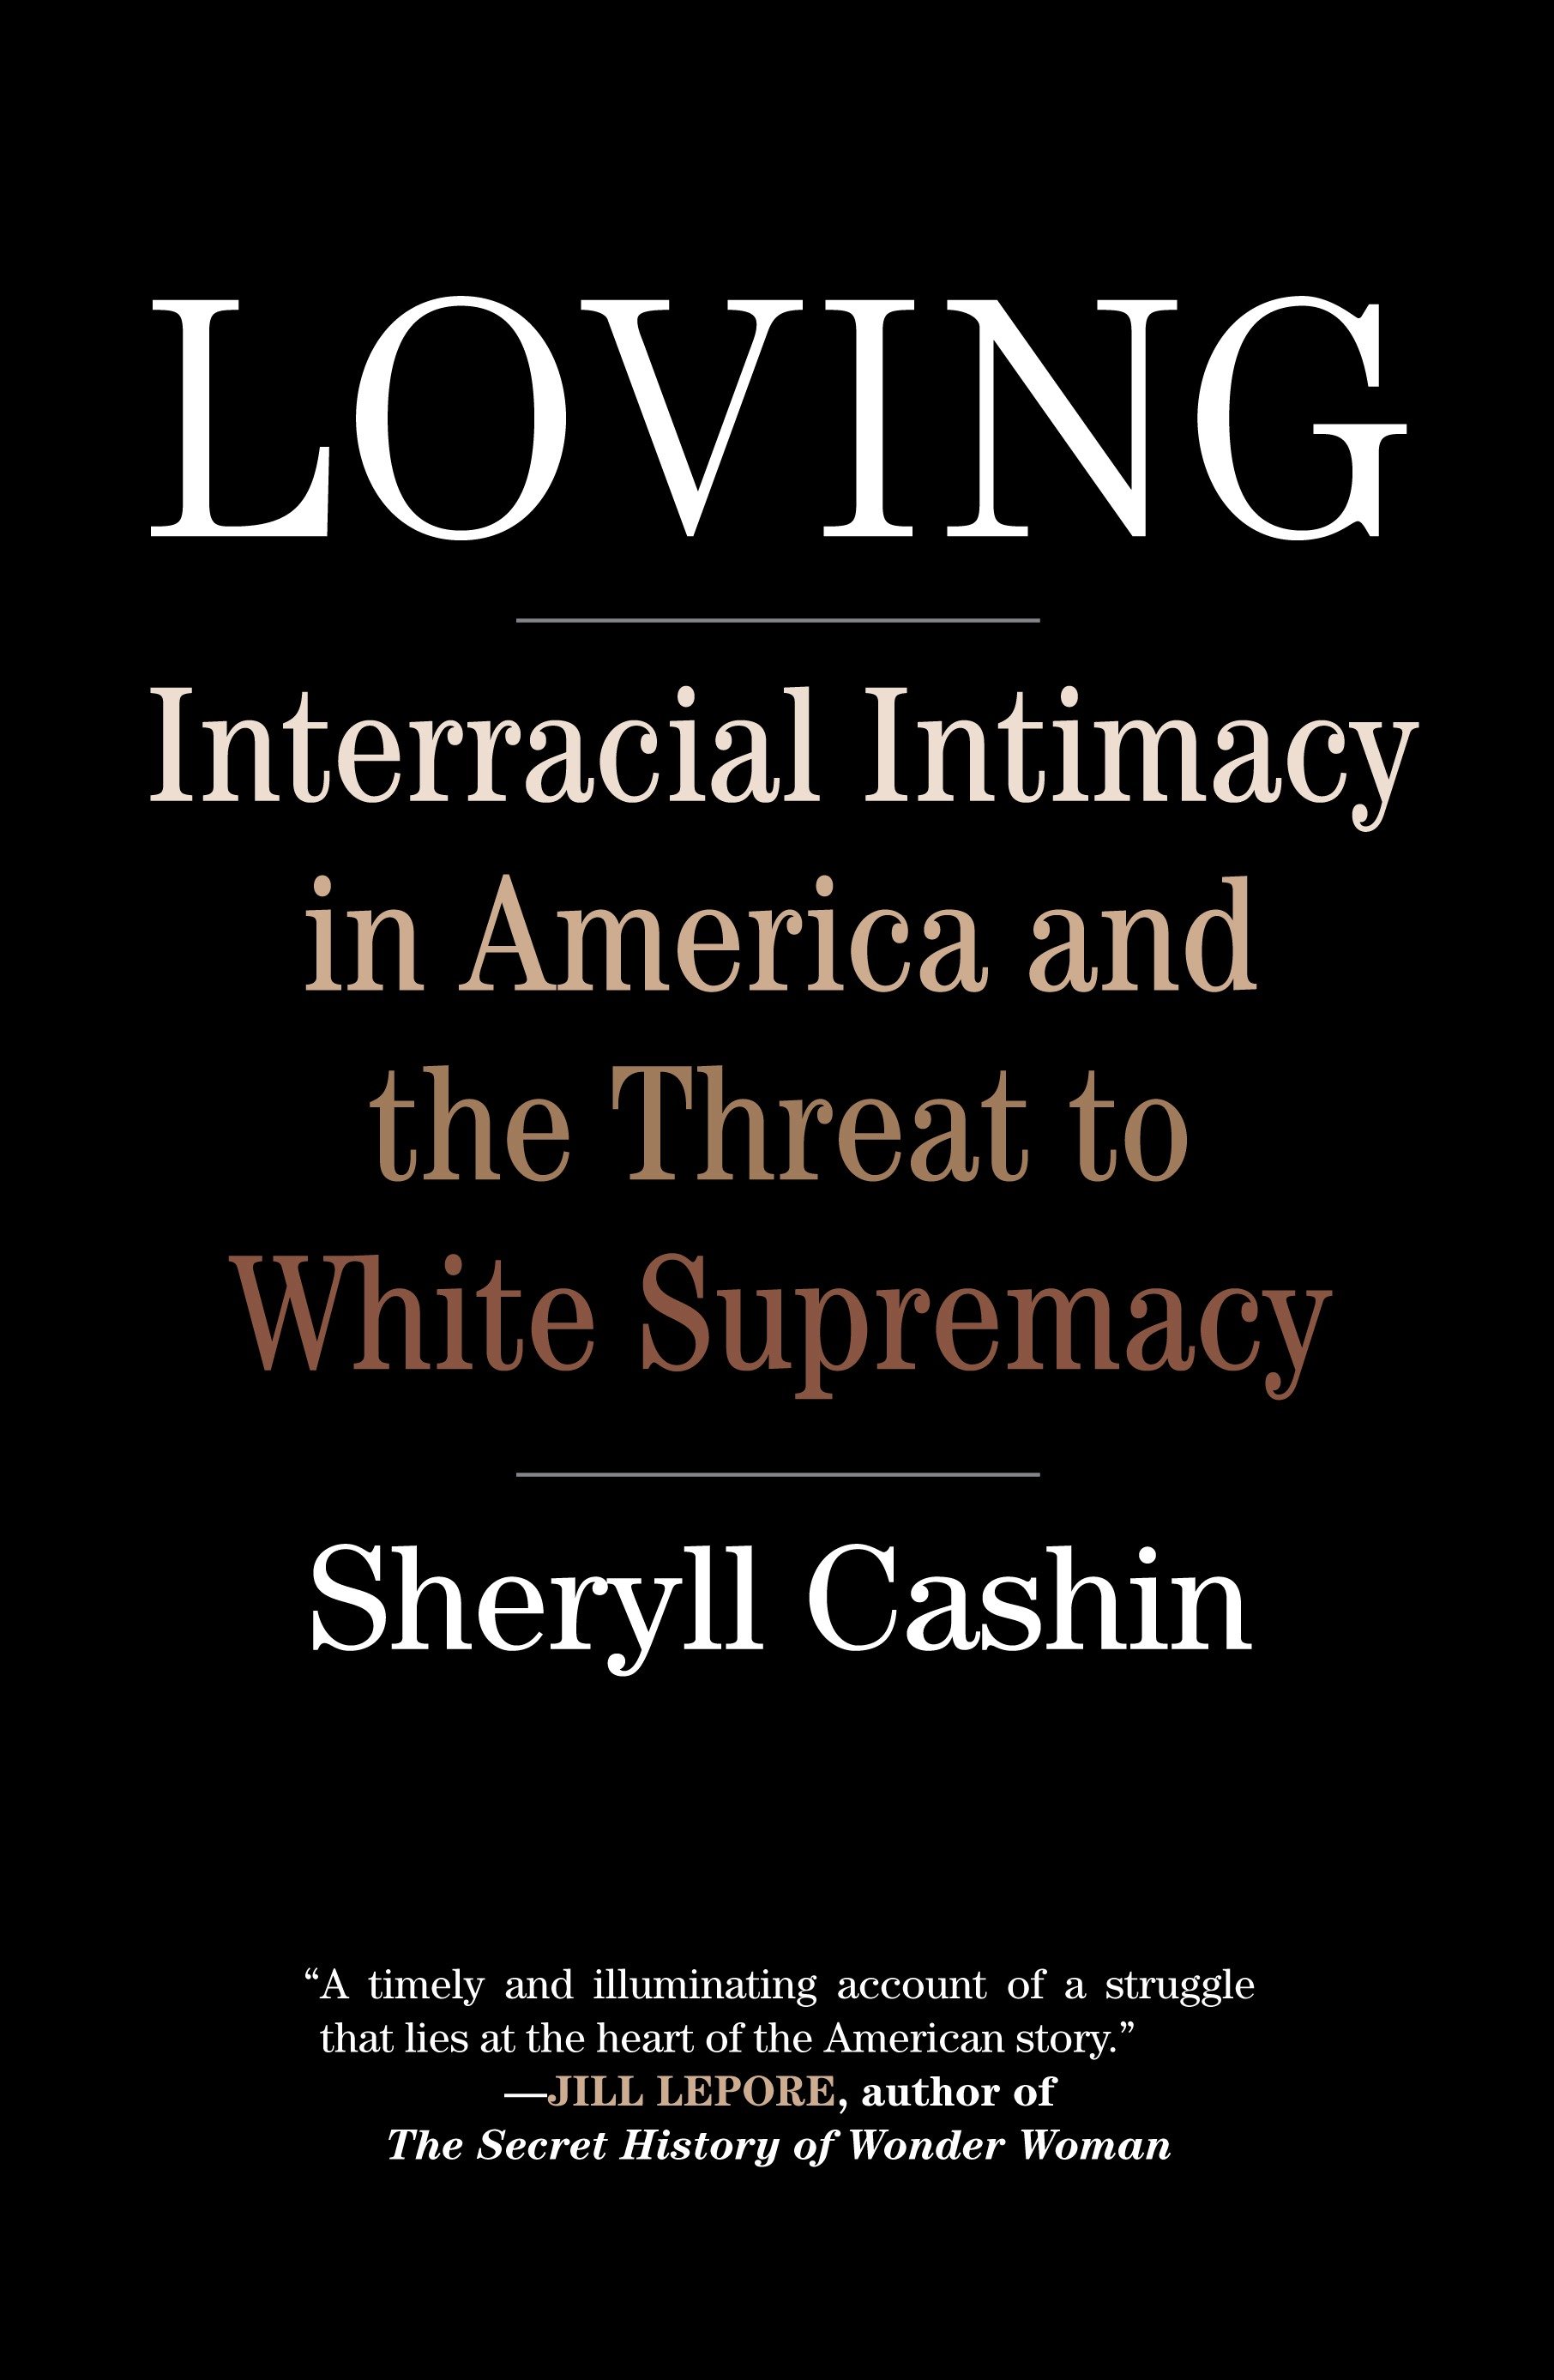 Loving interracial intimacy in America and the threat to white supremacy cover image